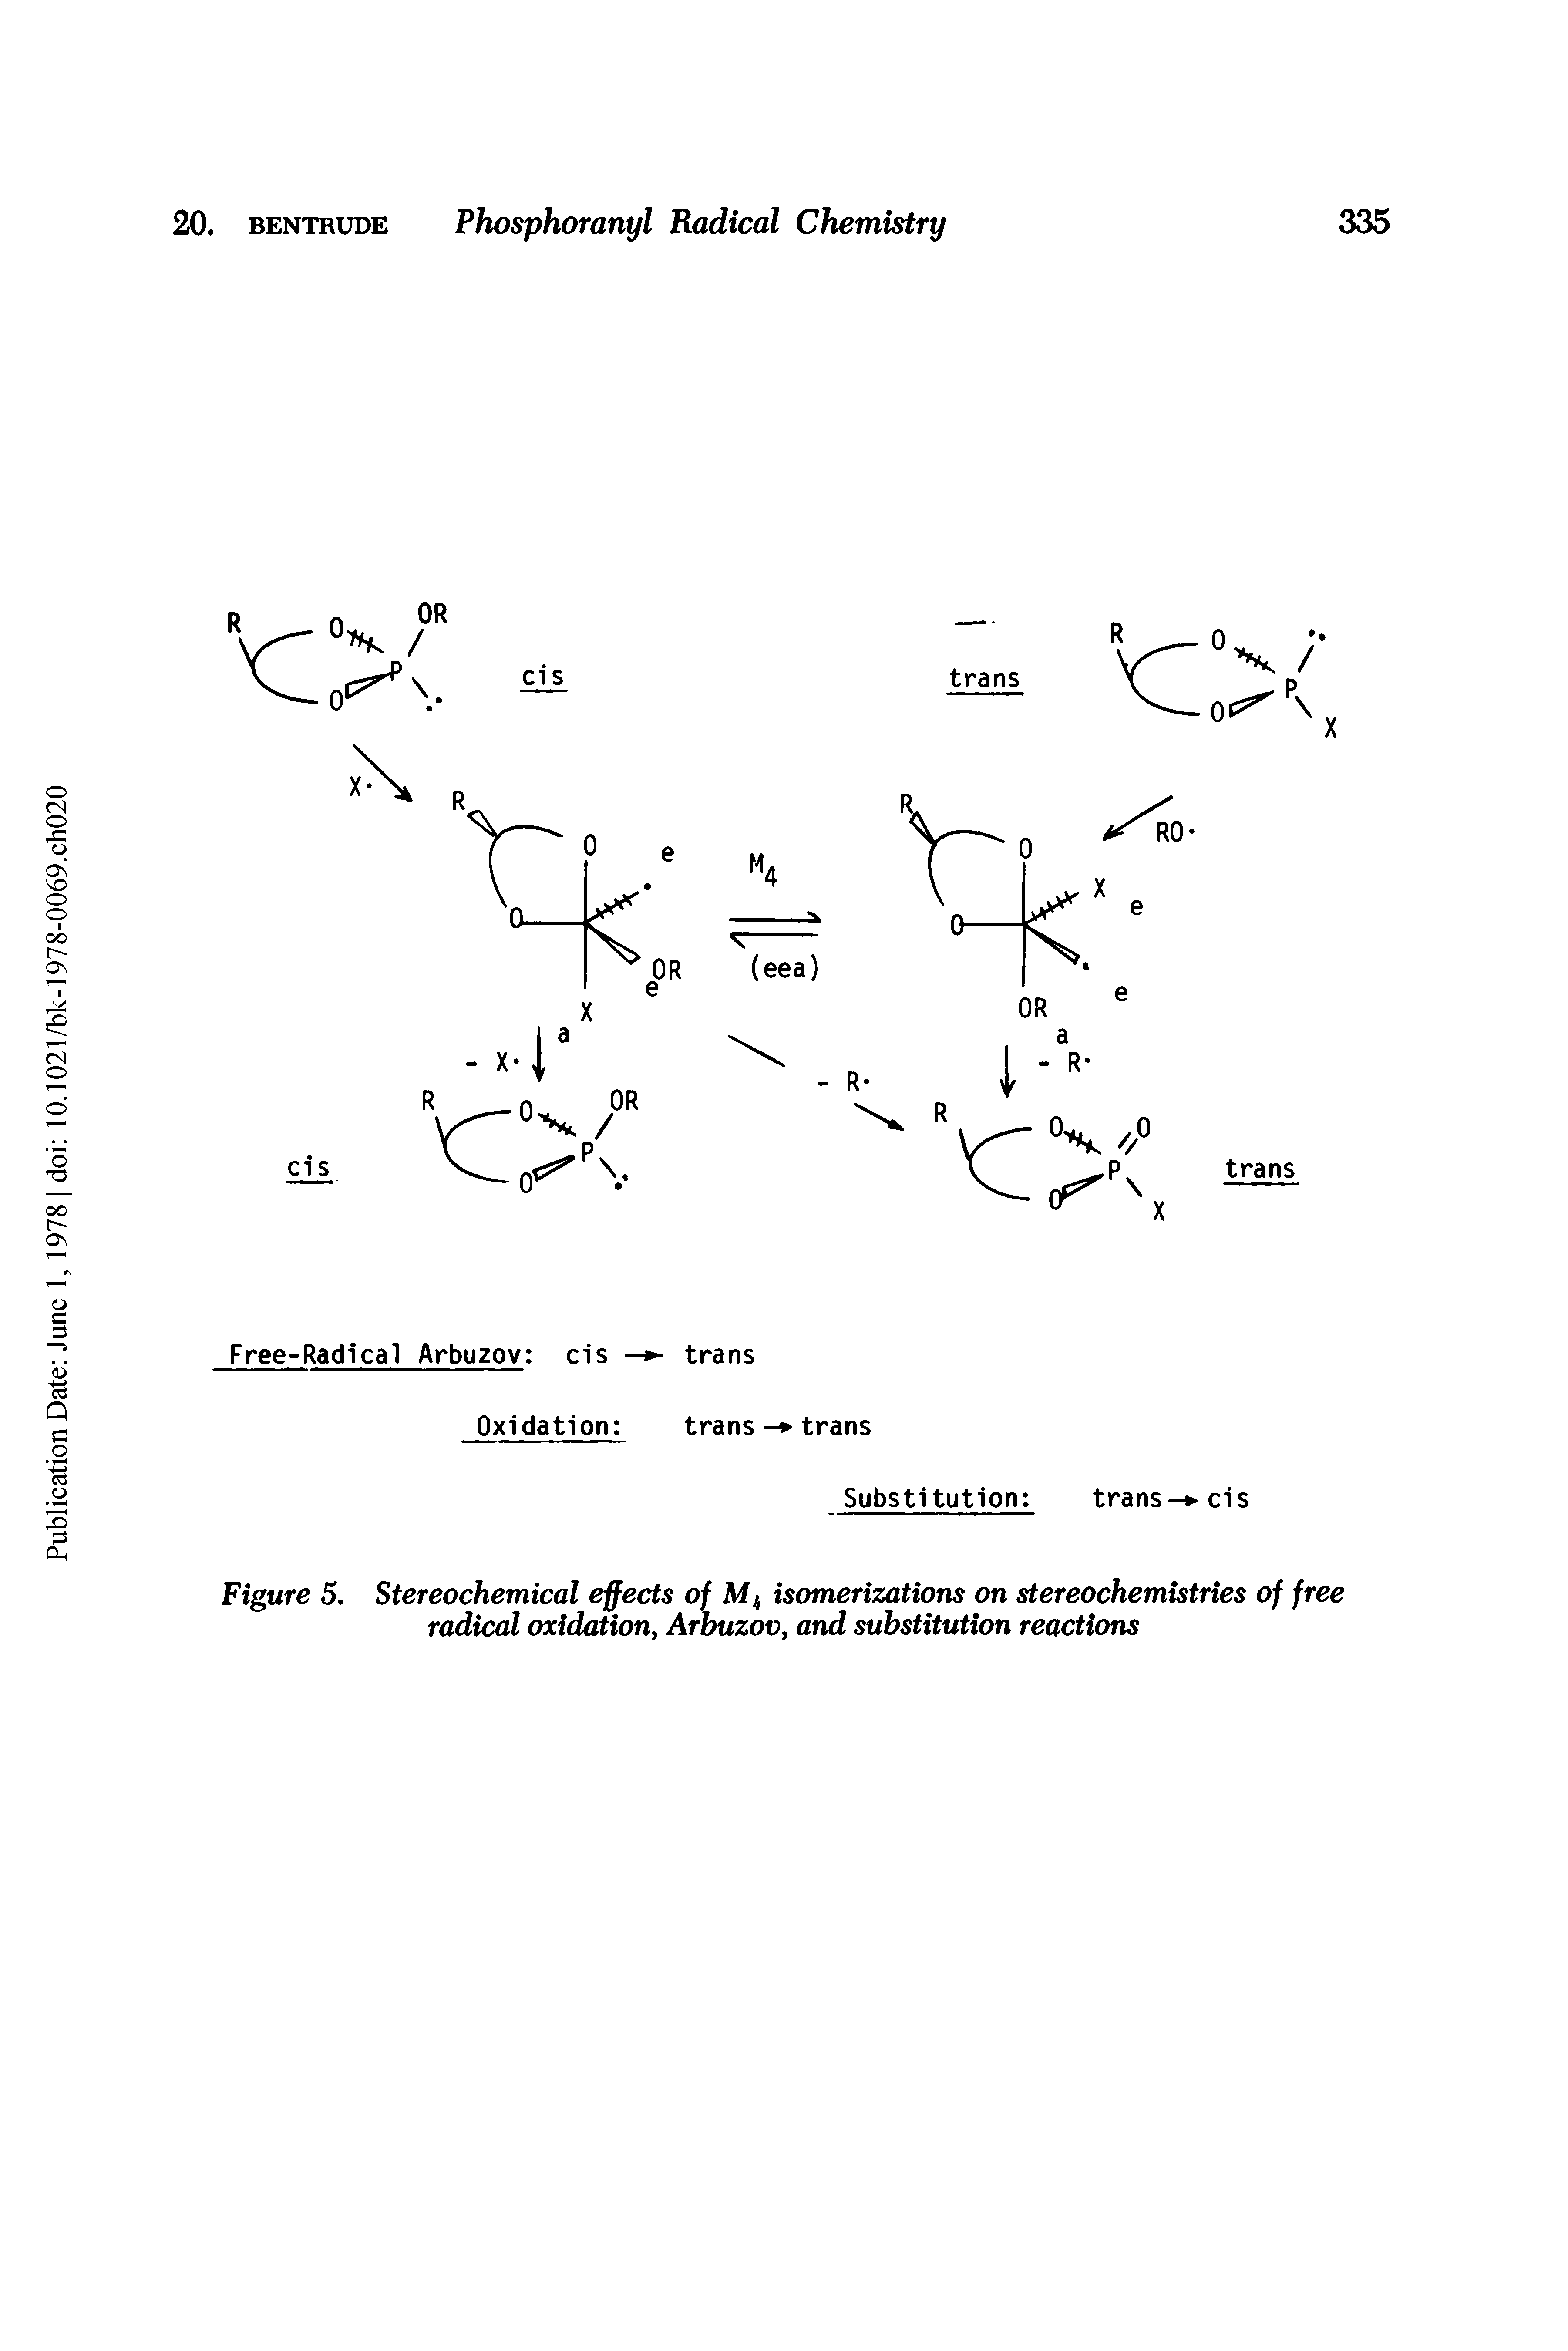 Figure 5. Stereochemical effects of M4 isomerizations on stereochemistries of free radical oxidation Arbuzov, and substitution reactions...